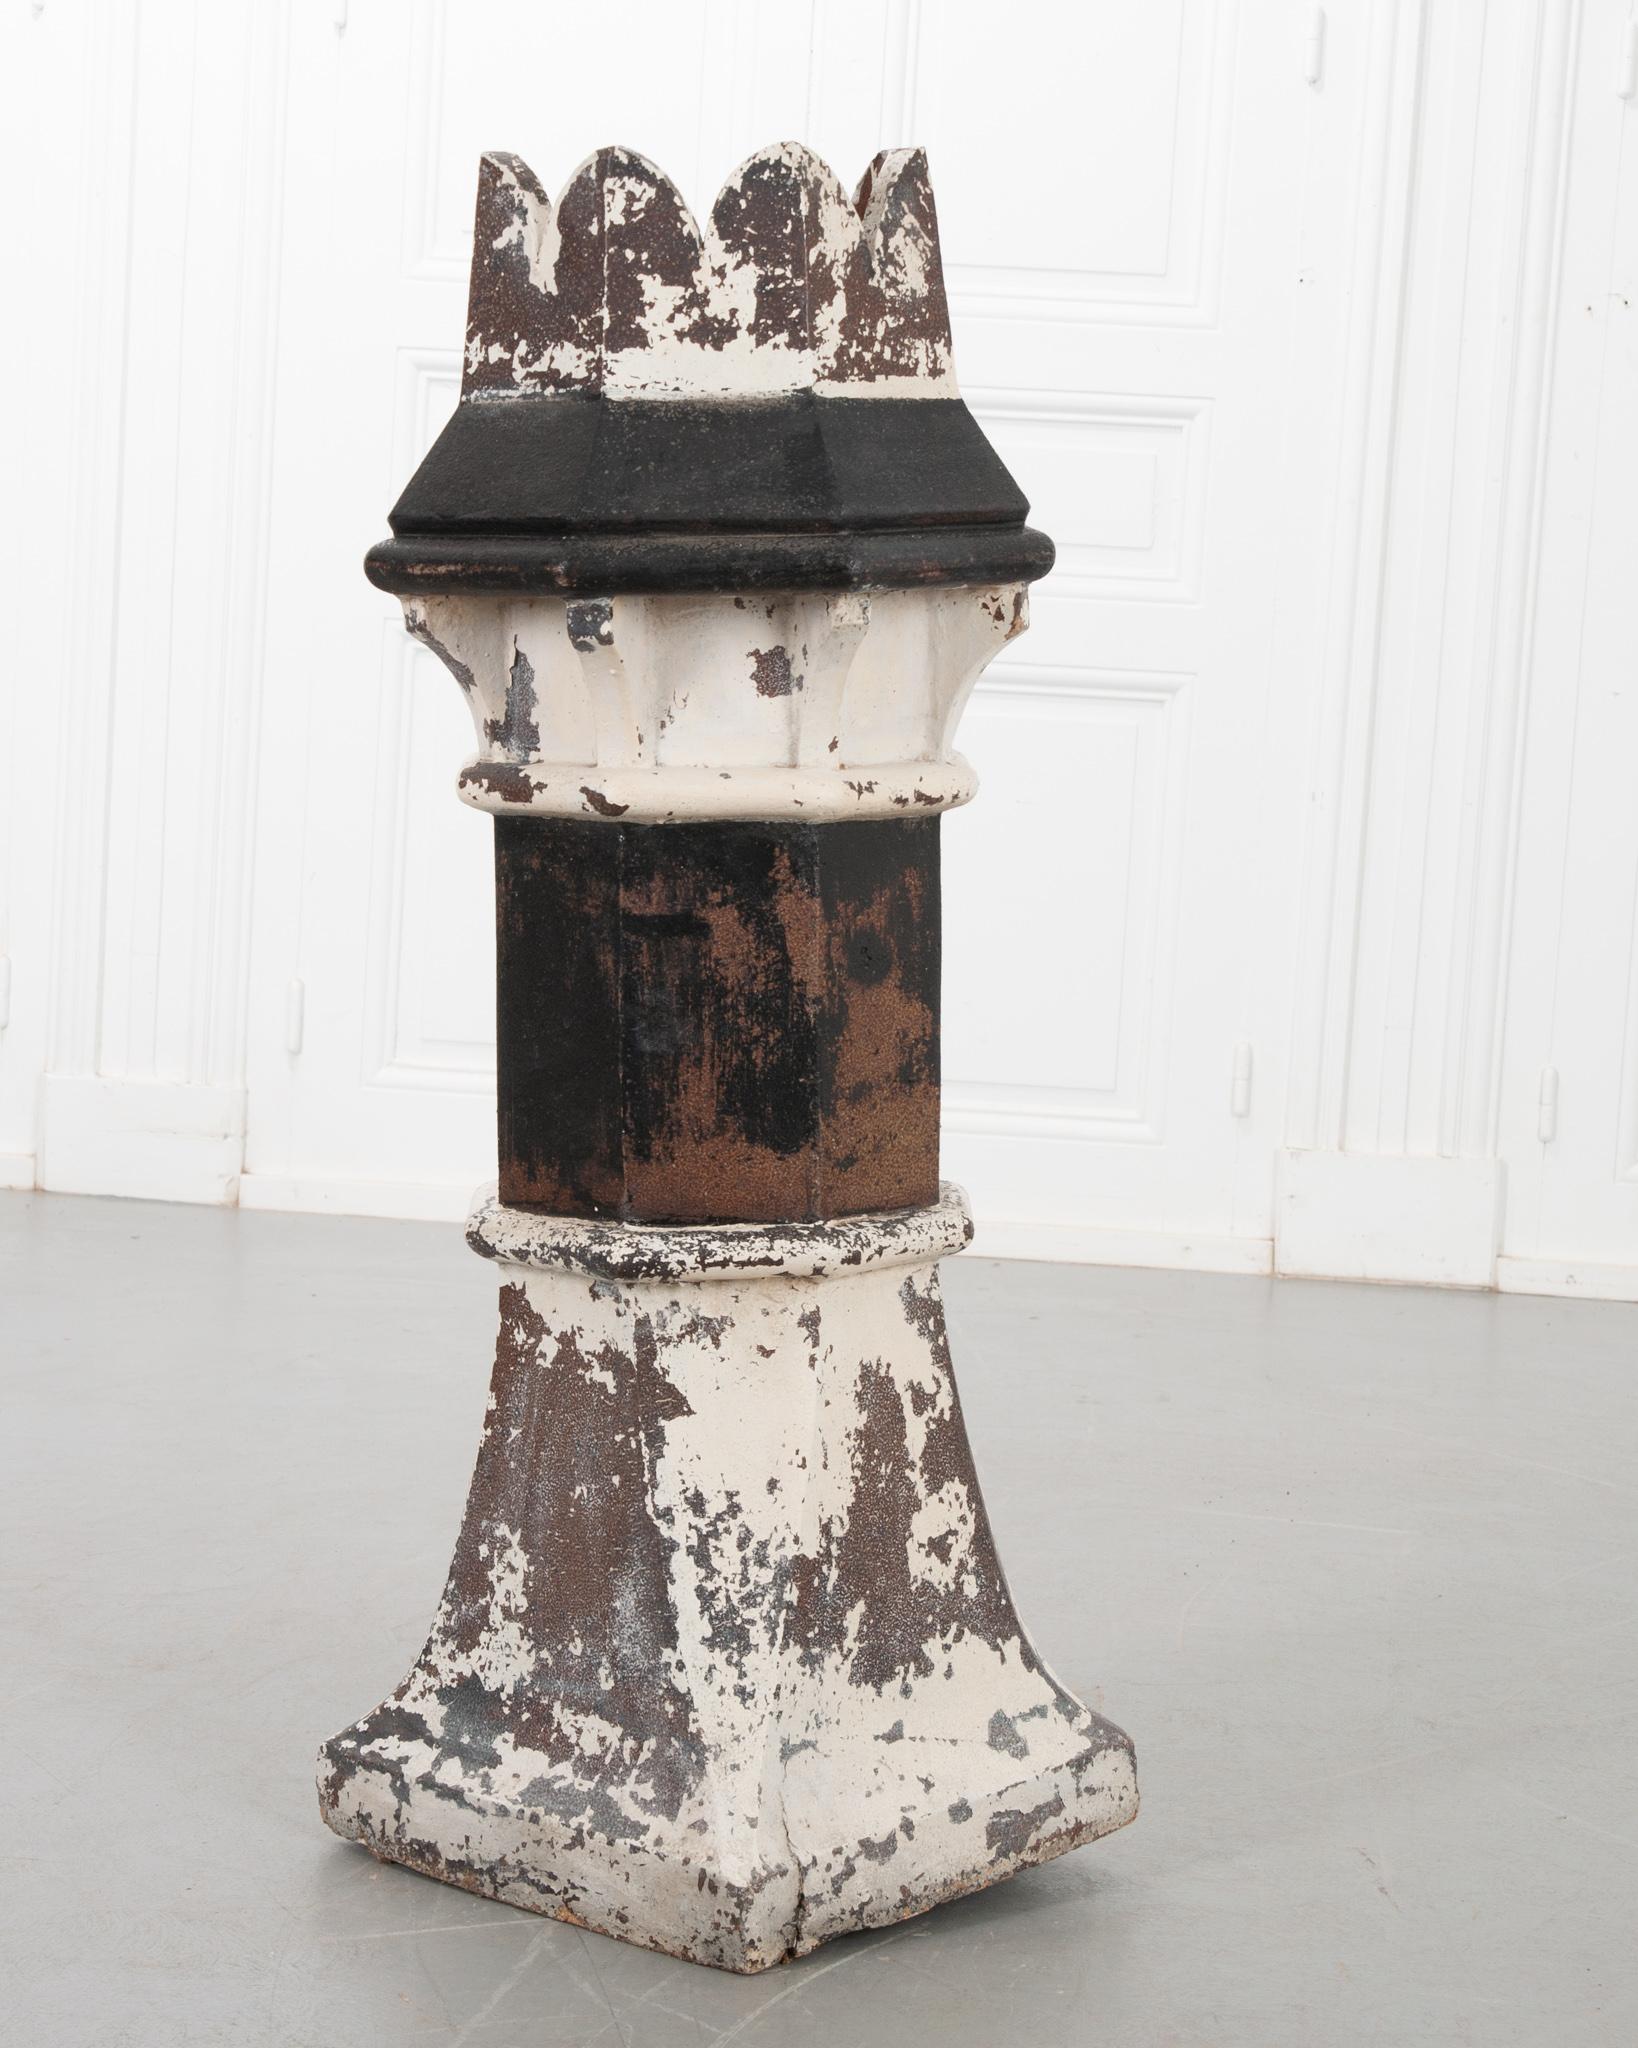 A remarkable Victorian-era English terracotta chimney pot. This antique architectural element serves as both decorative and functional additions to traditional chimney flues. During the 1800s, coal was used more and more to heat homes, however the